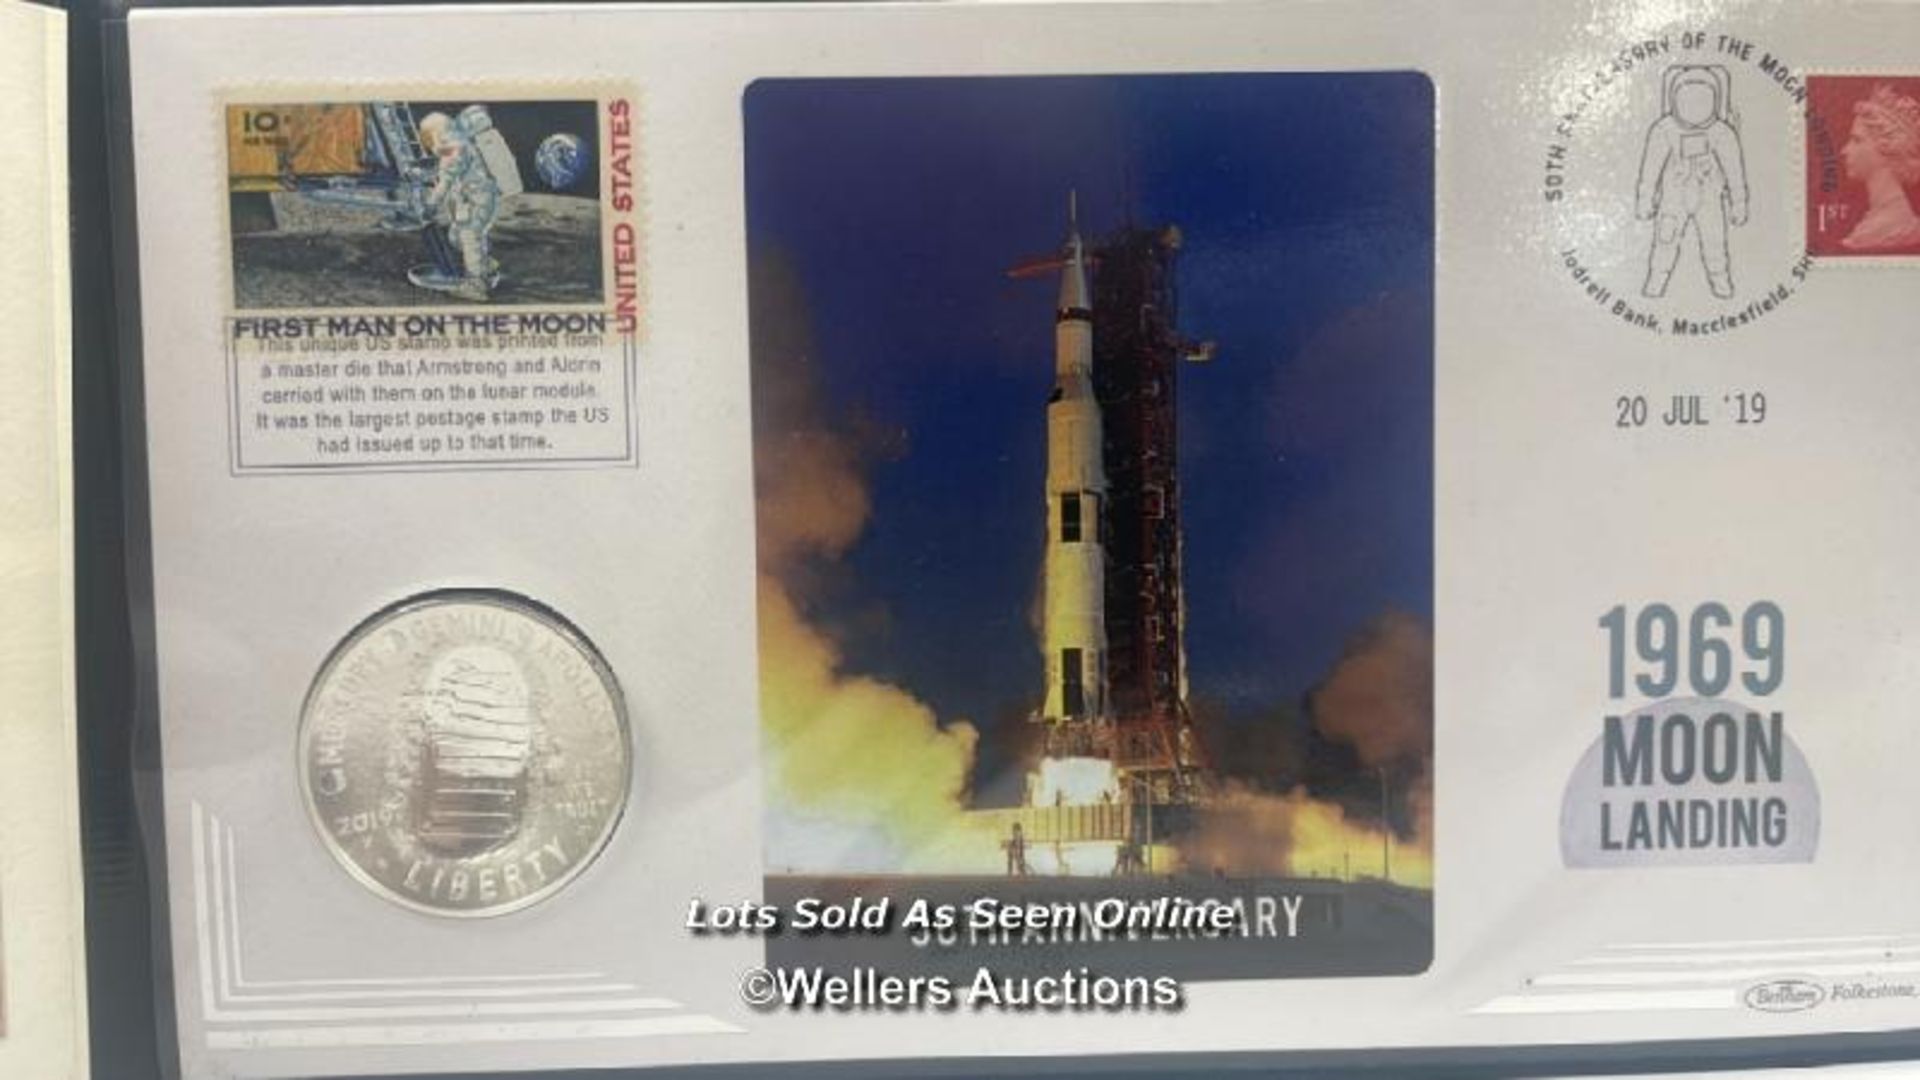 HARRINGTON & BYRNE 2019 50TH ANNIVERSARY OF THE MOON LANDING SILVER PROOF $1 COIN AND MOON LANDING - Image 2 of 8